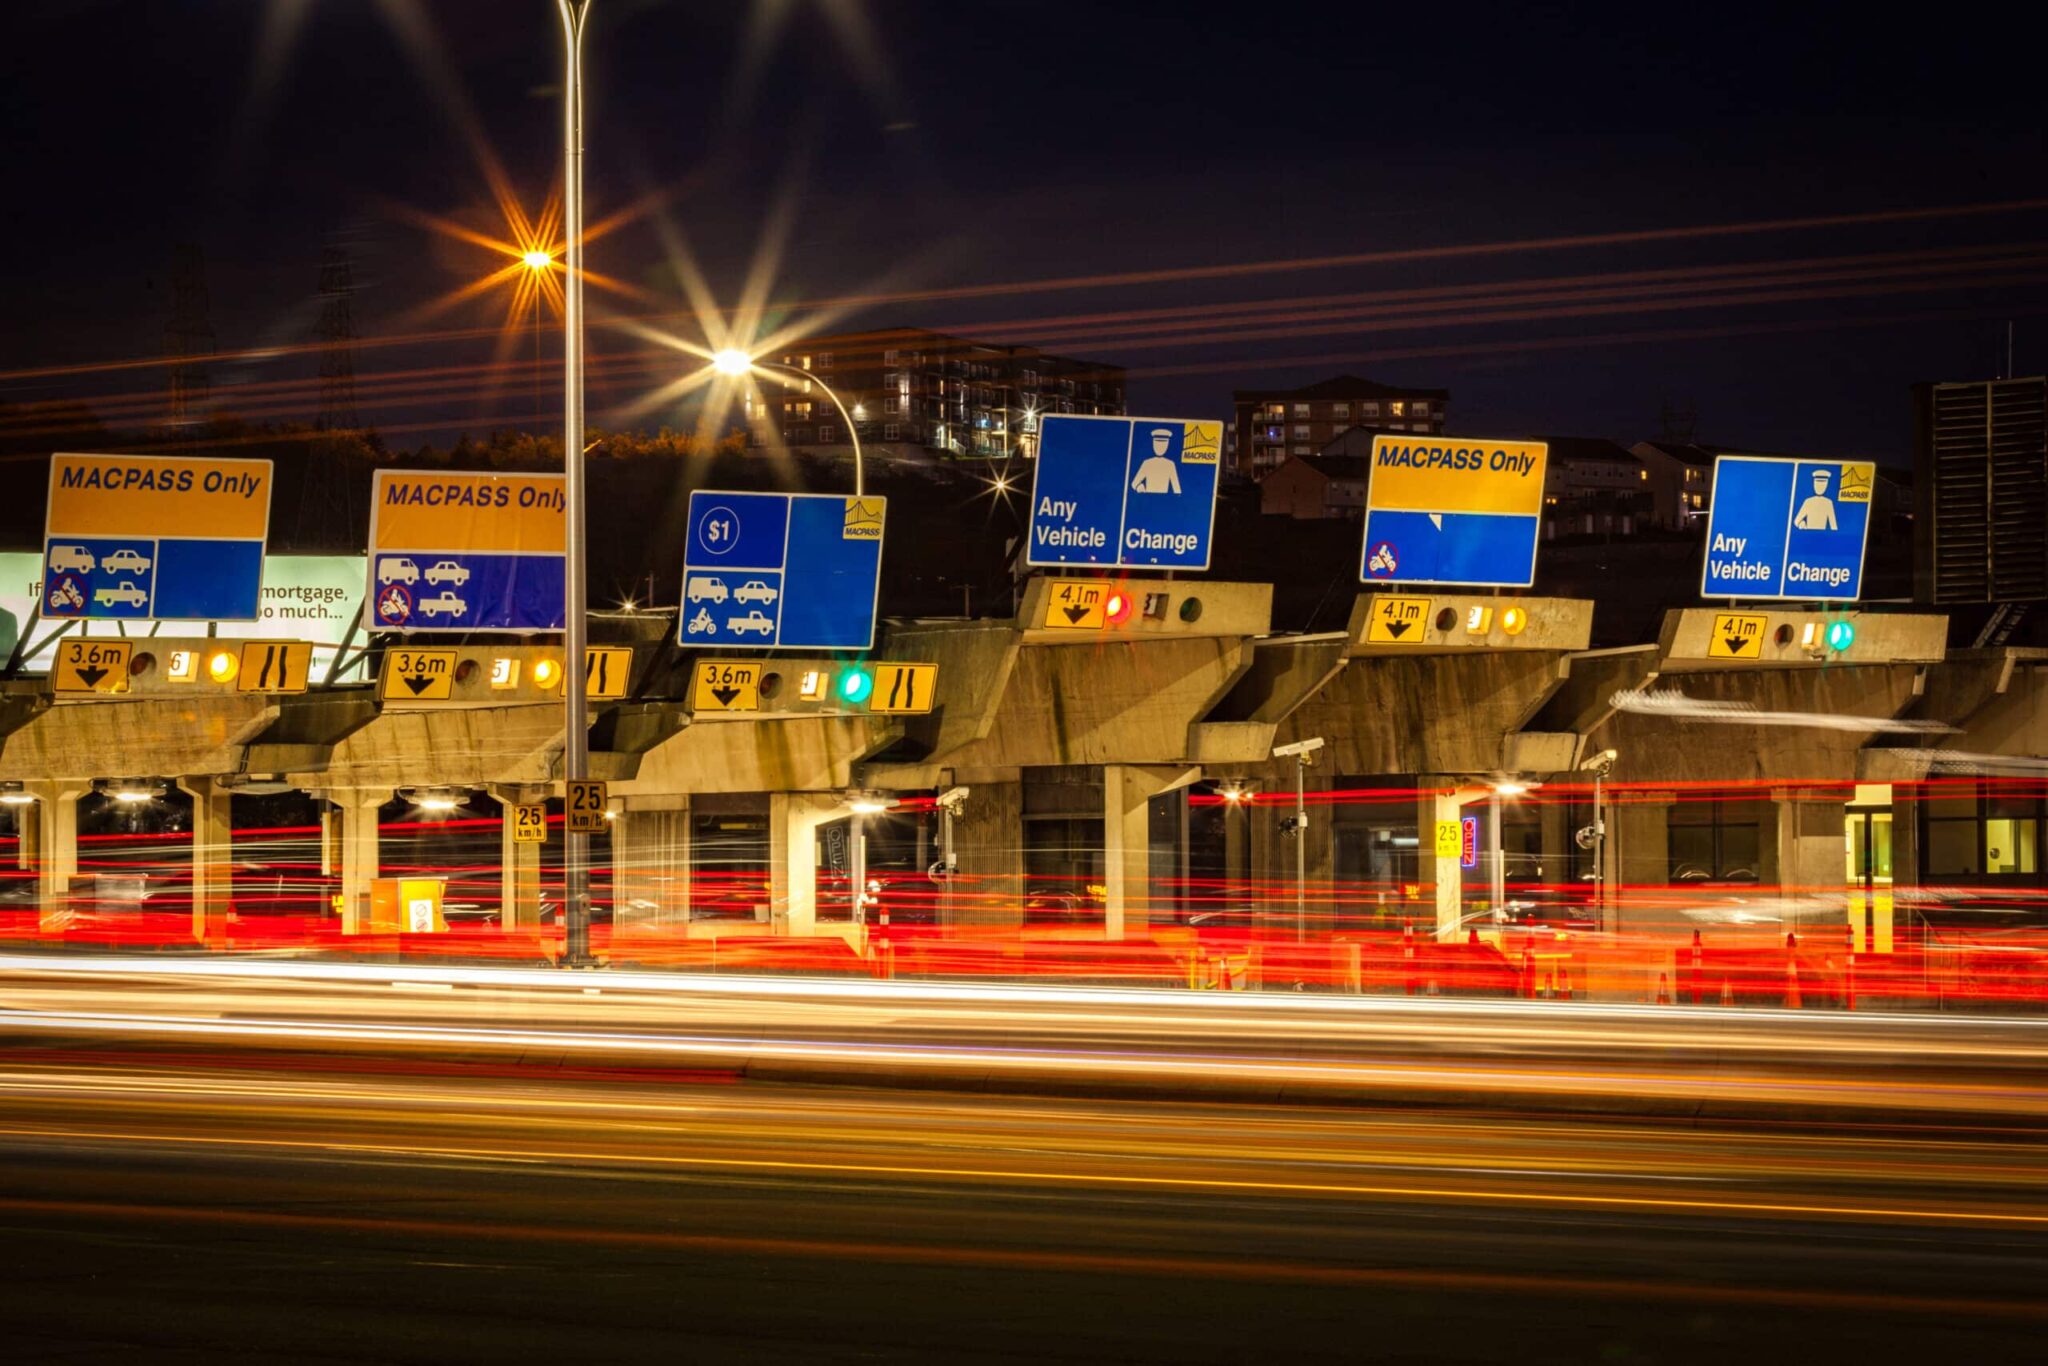 A long-exposure photo of vehicles driving through the MacKay Bridge toll booths.